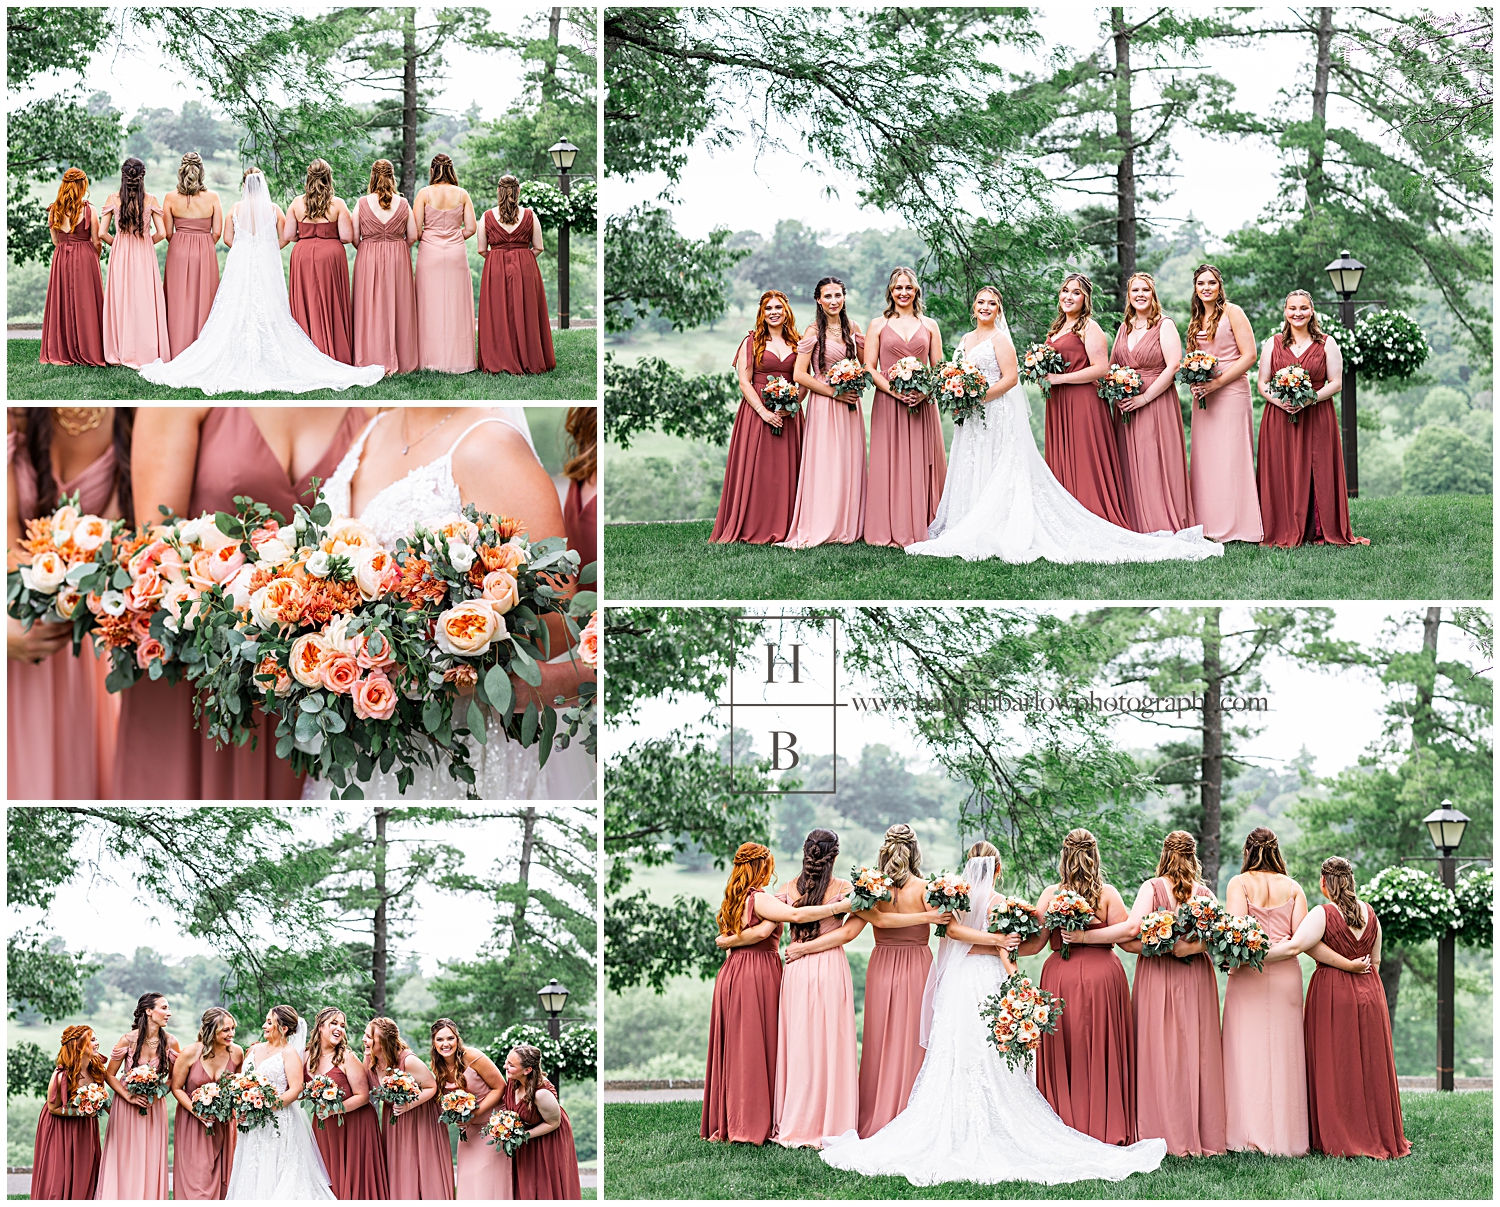 Bridesmaids wear differing colors of pink and color and pose for group wedding photos